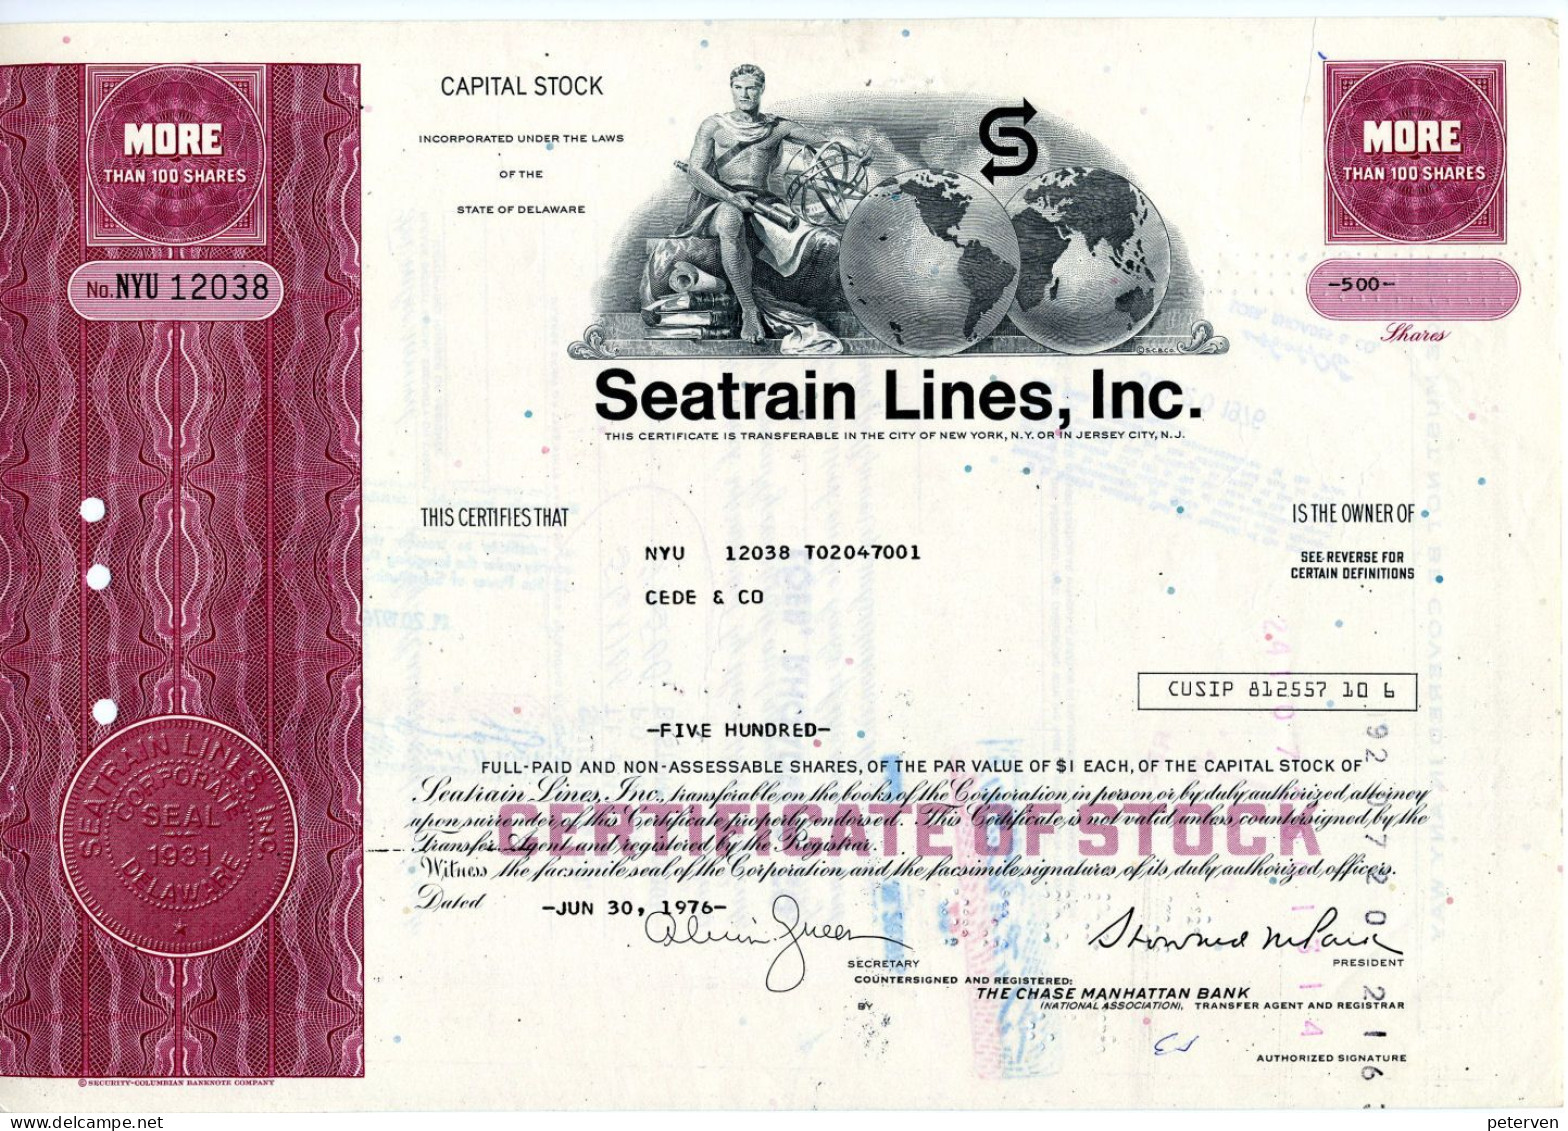 SEATRAIN LINES, Incorporated - Transports